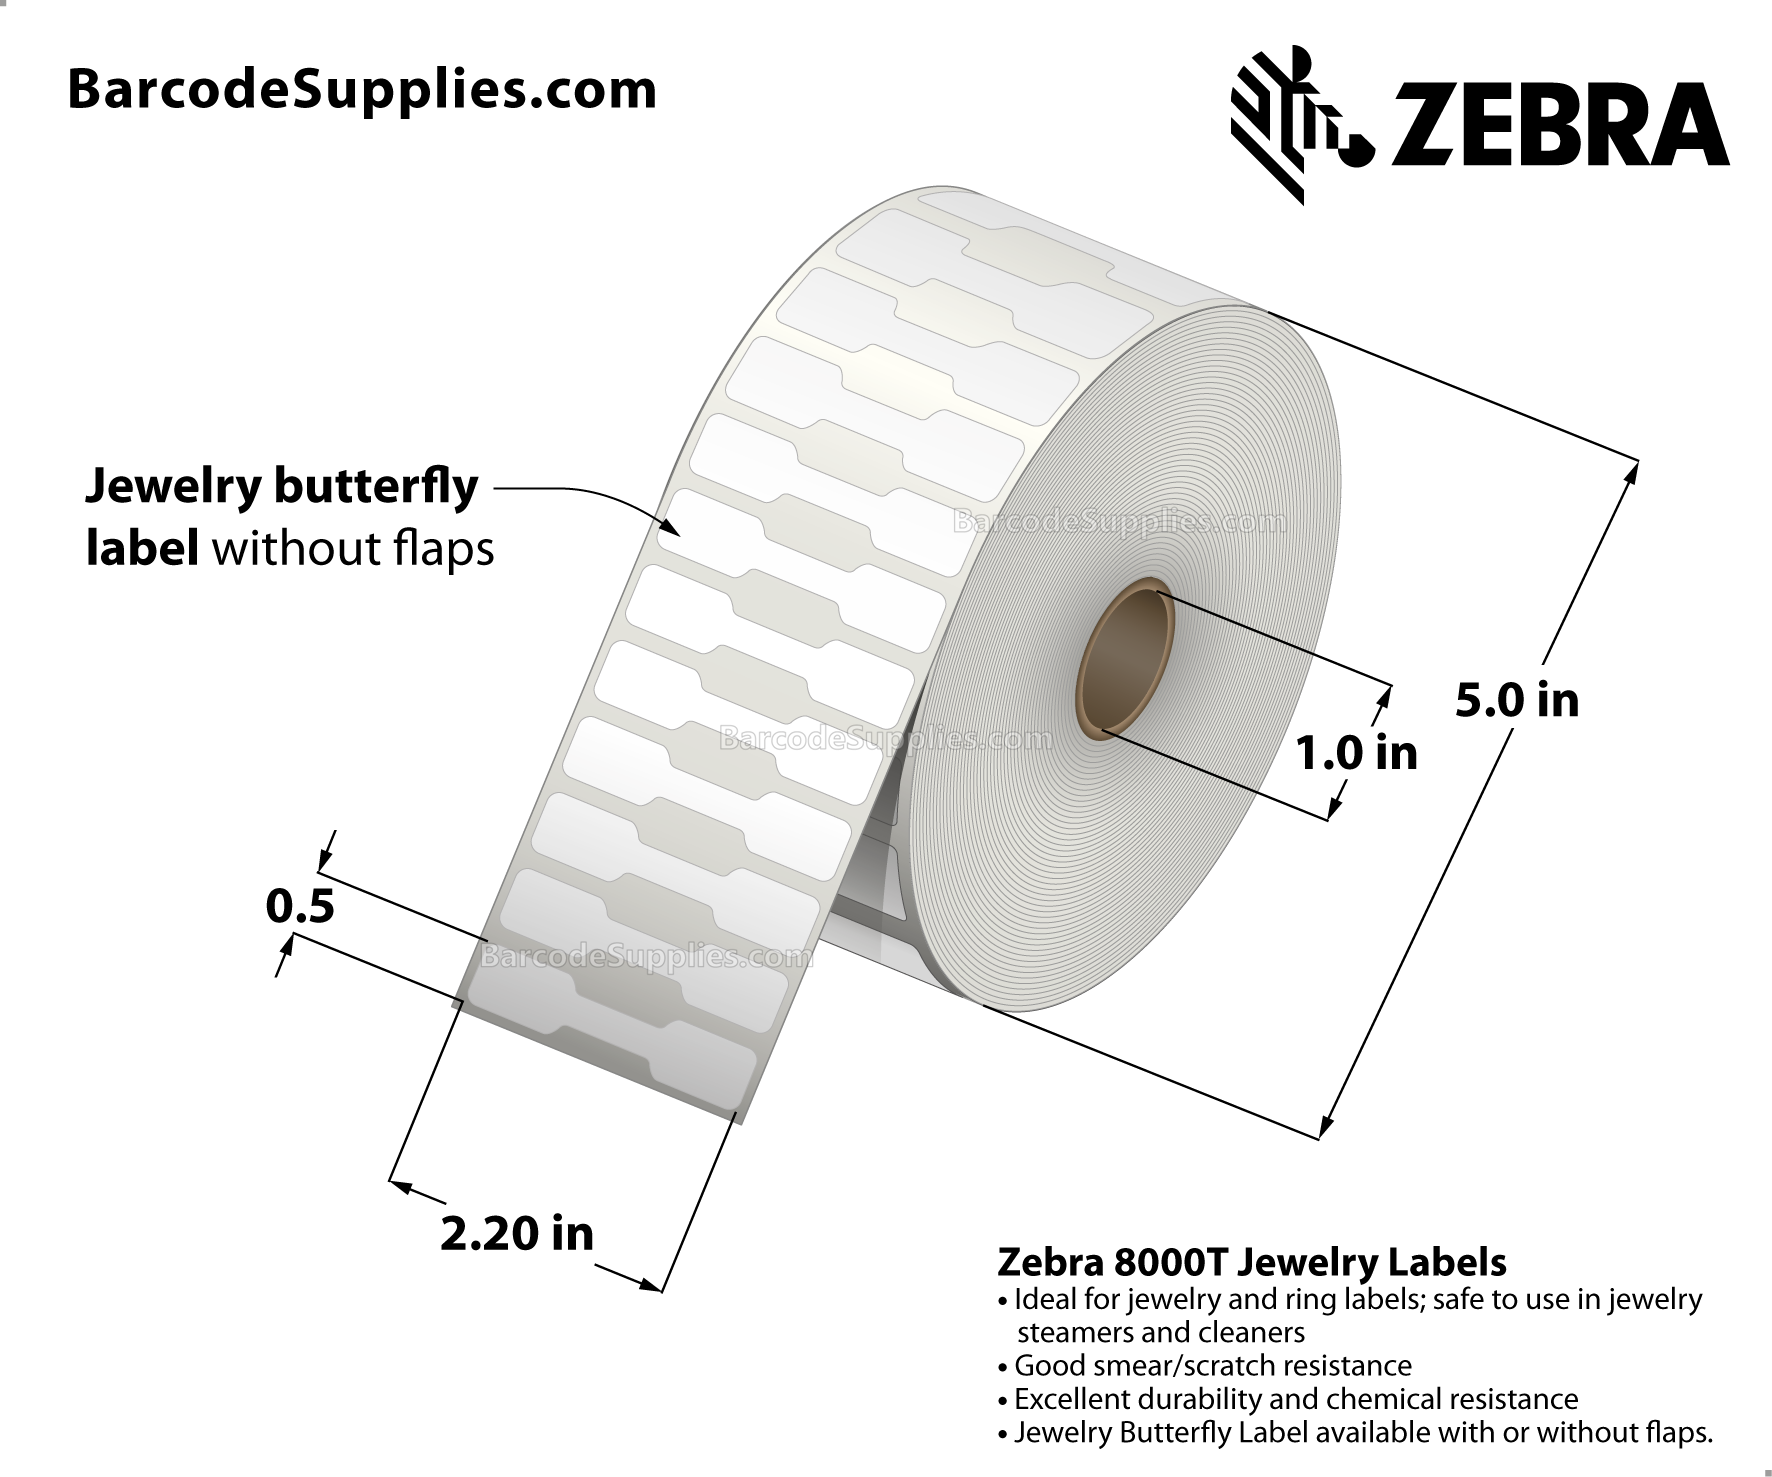 2.2 x 0.5 Thermal Transfer White 8000T Jewelry (Jewelry Butterfly Label w/o flaps) Labels With Permanent Adhesive - Not Perforated - 3510 Labels Per Roll - Carton Of 6 Rolls - 21060 Labels Total - MPN: 10010066